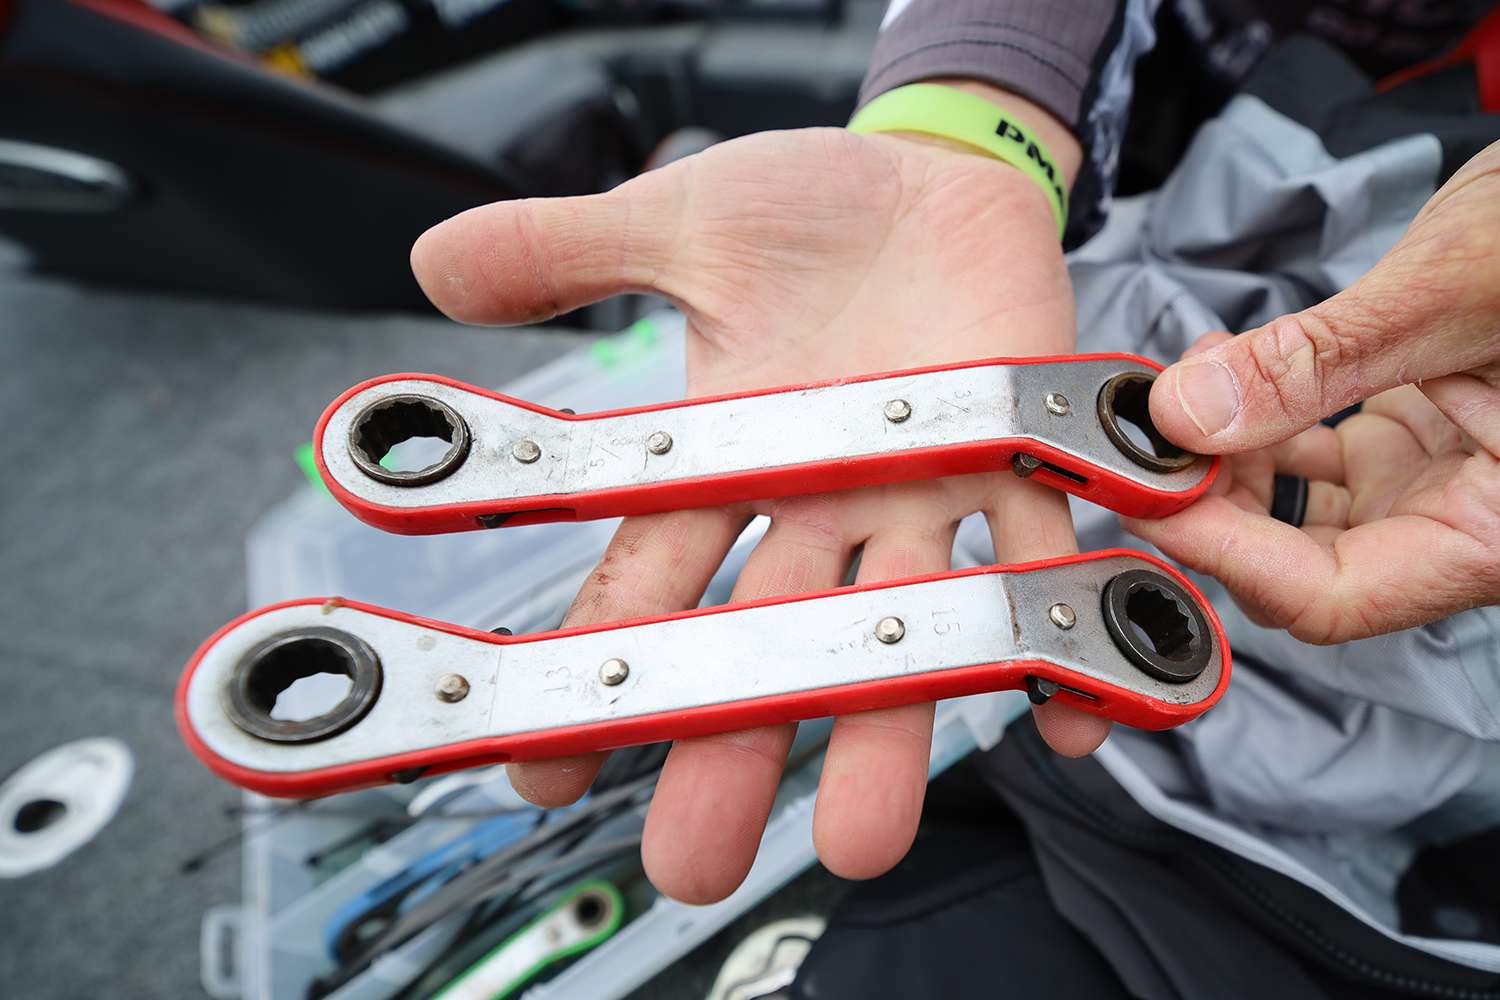 He likes tools that double up, each of these ratcheting wrenches covers two separate sizes, meaning he has four wrenches in his hand. It's all about the space.